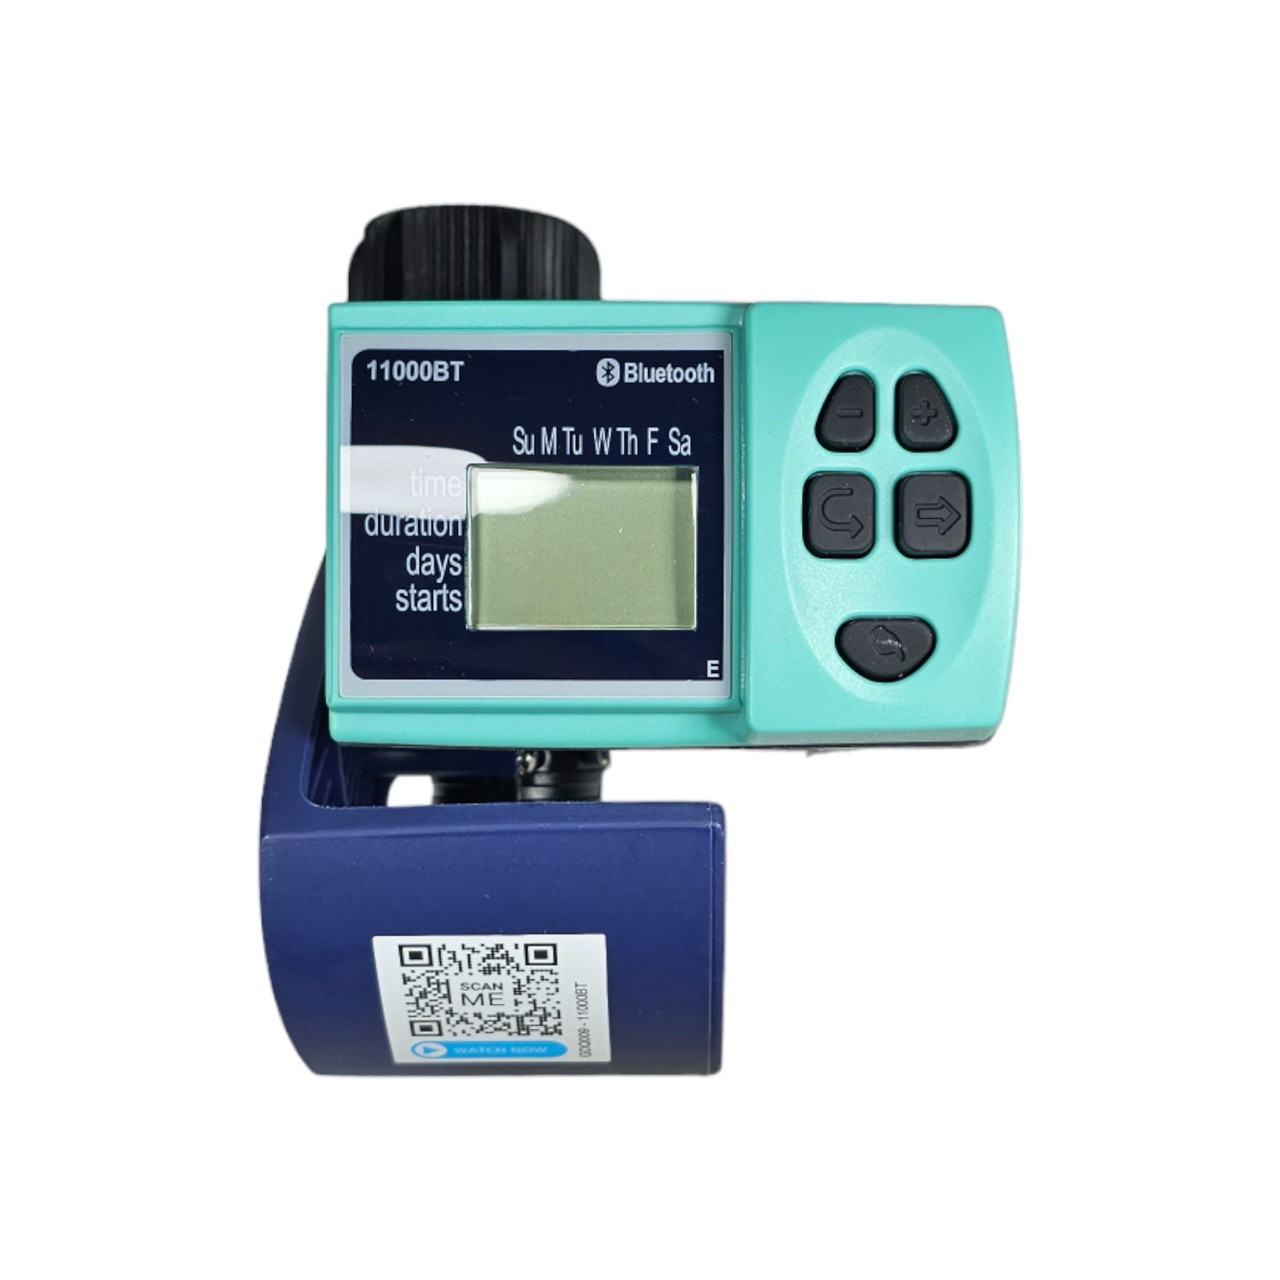 Galcon Flip Open LCD Timer